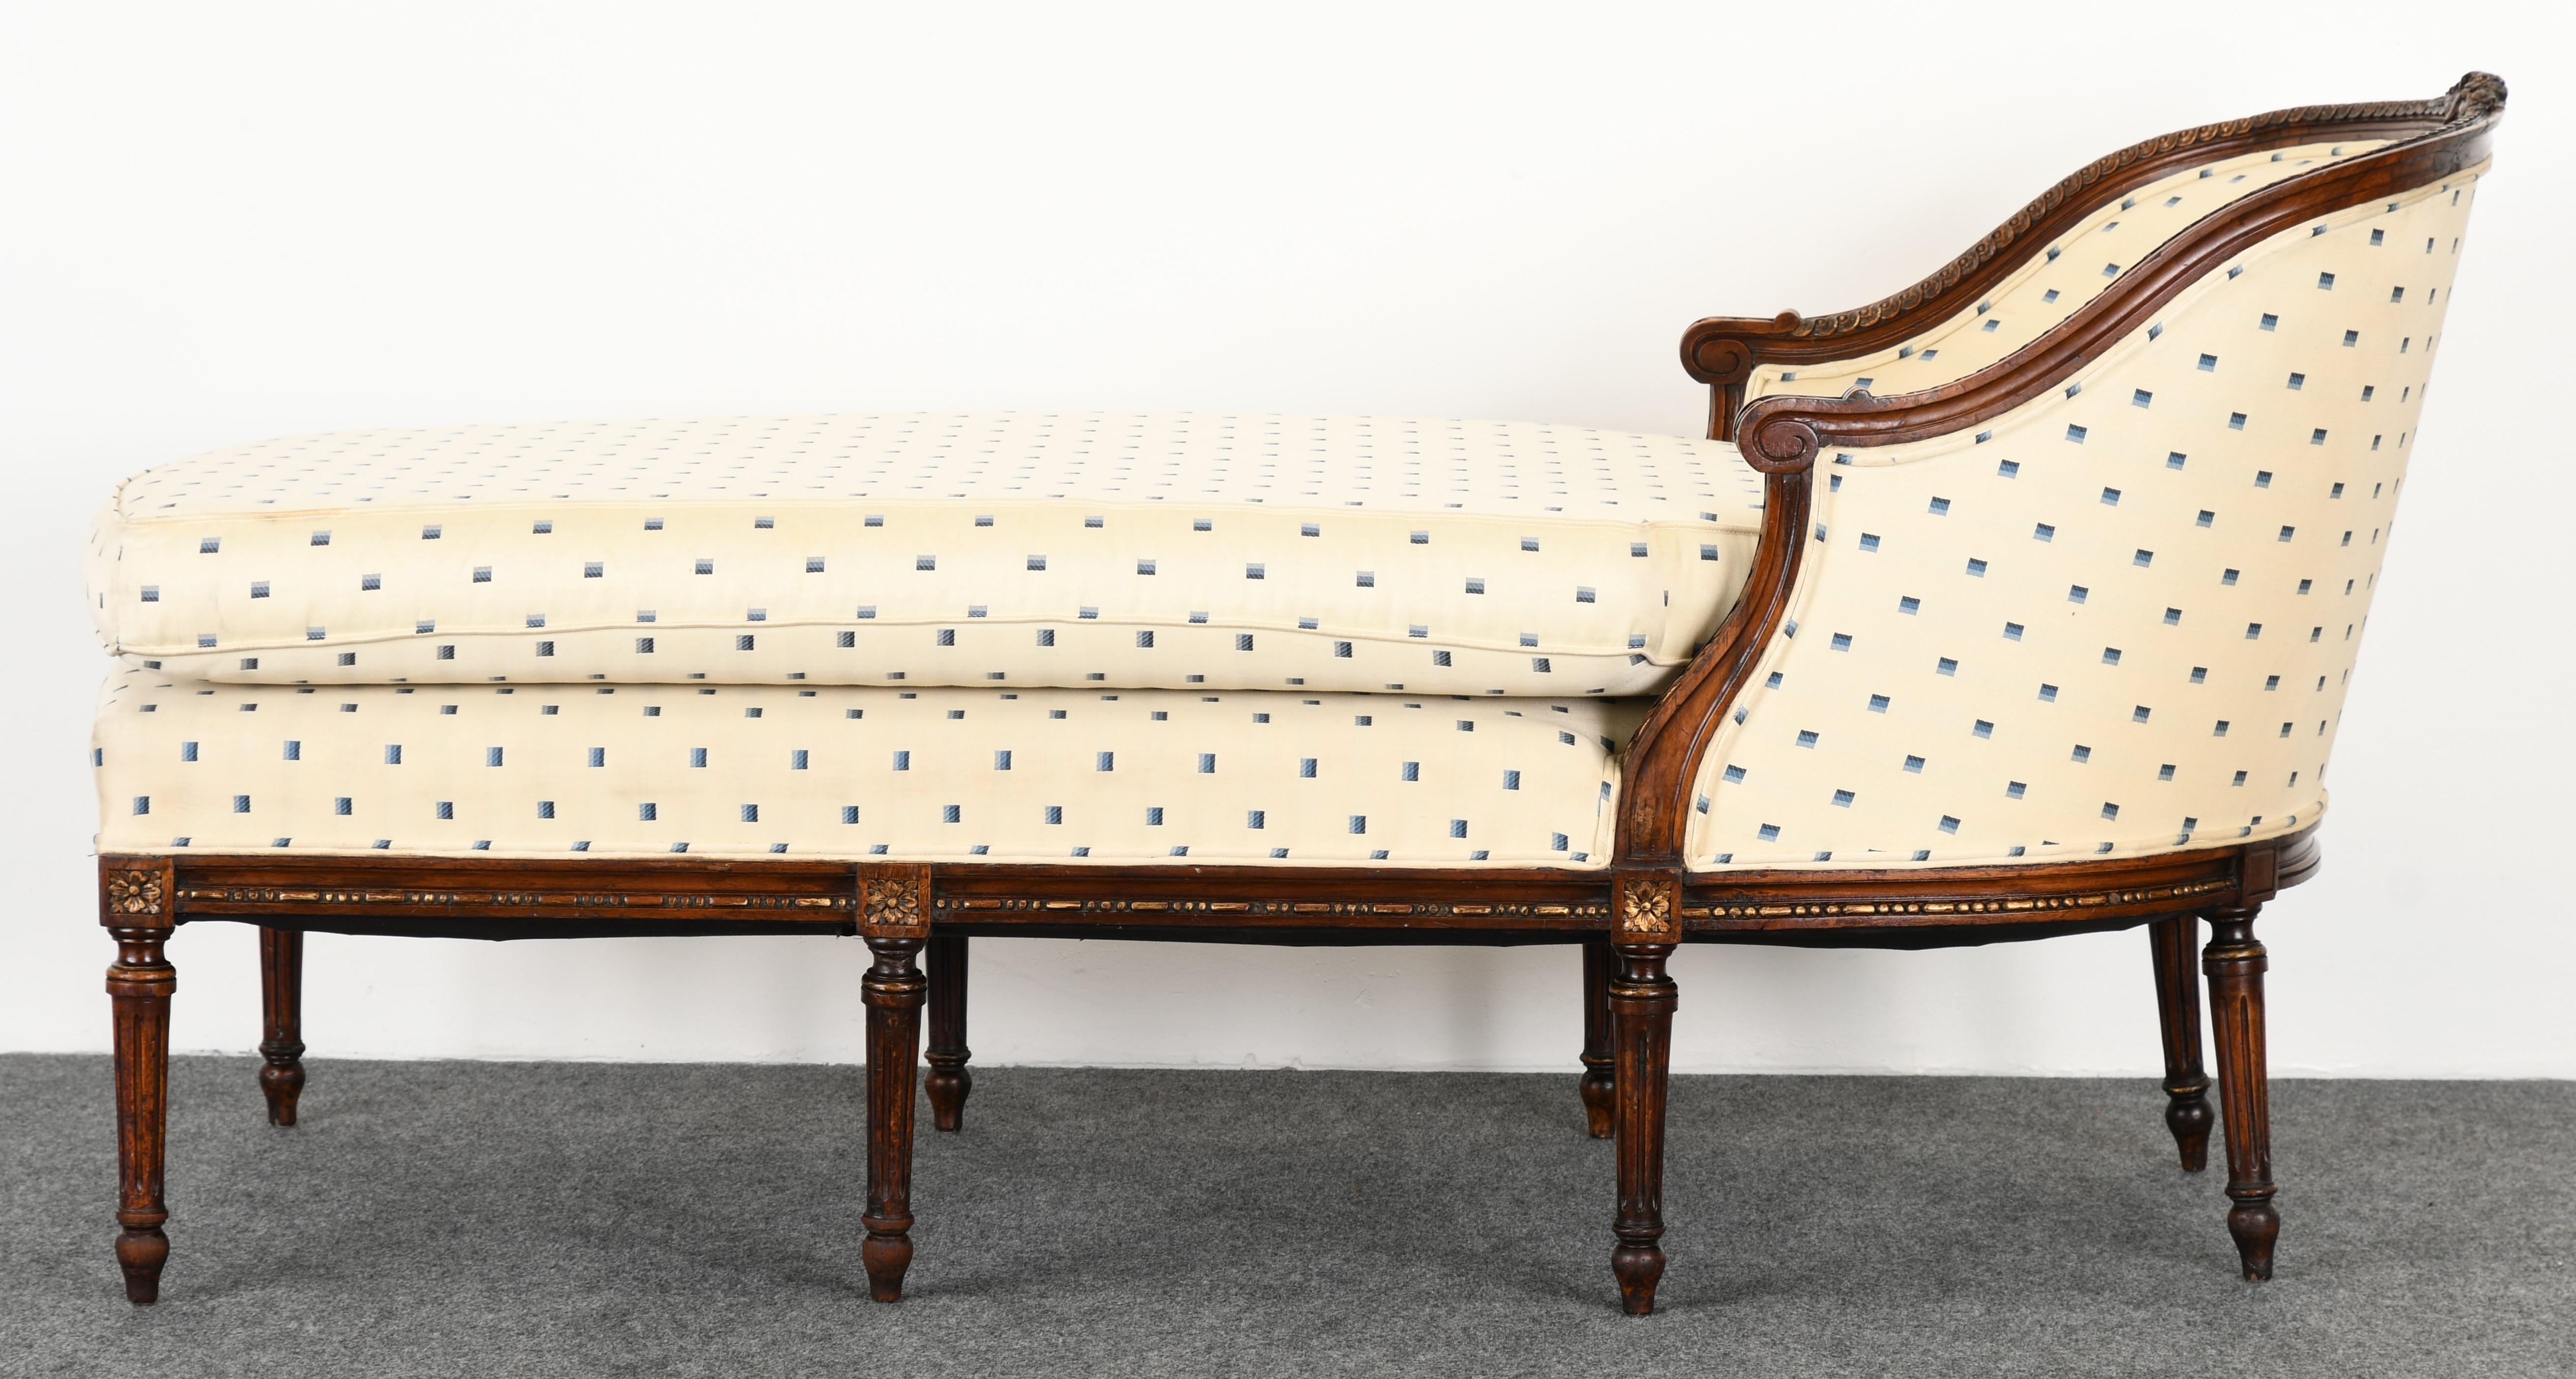 French Louis XVI Style Chaise Lounge, 19th Century (amerikanisch)